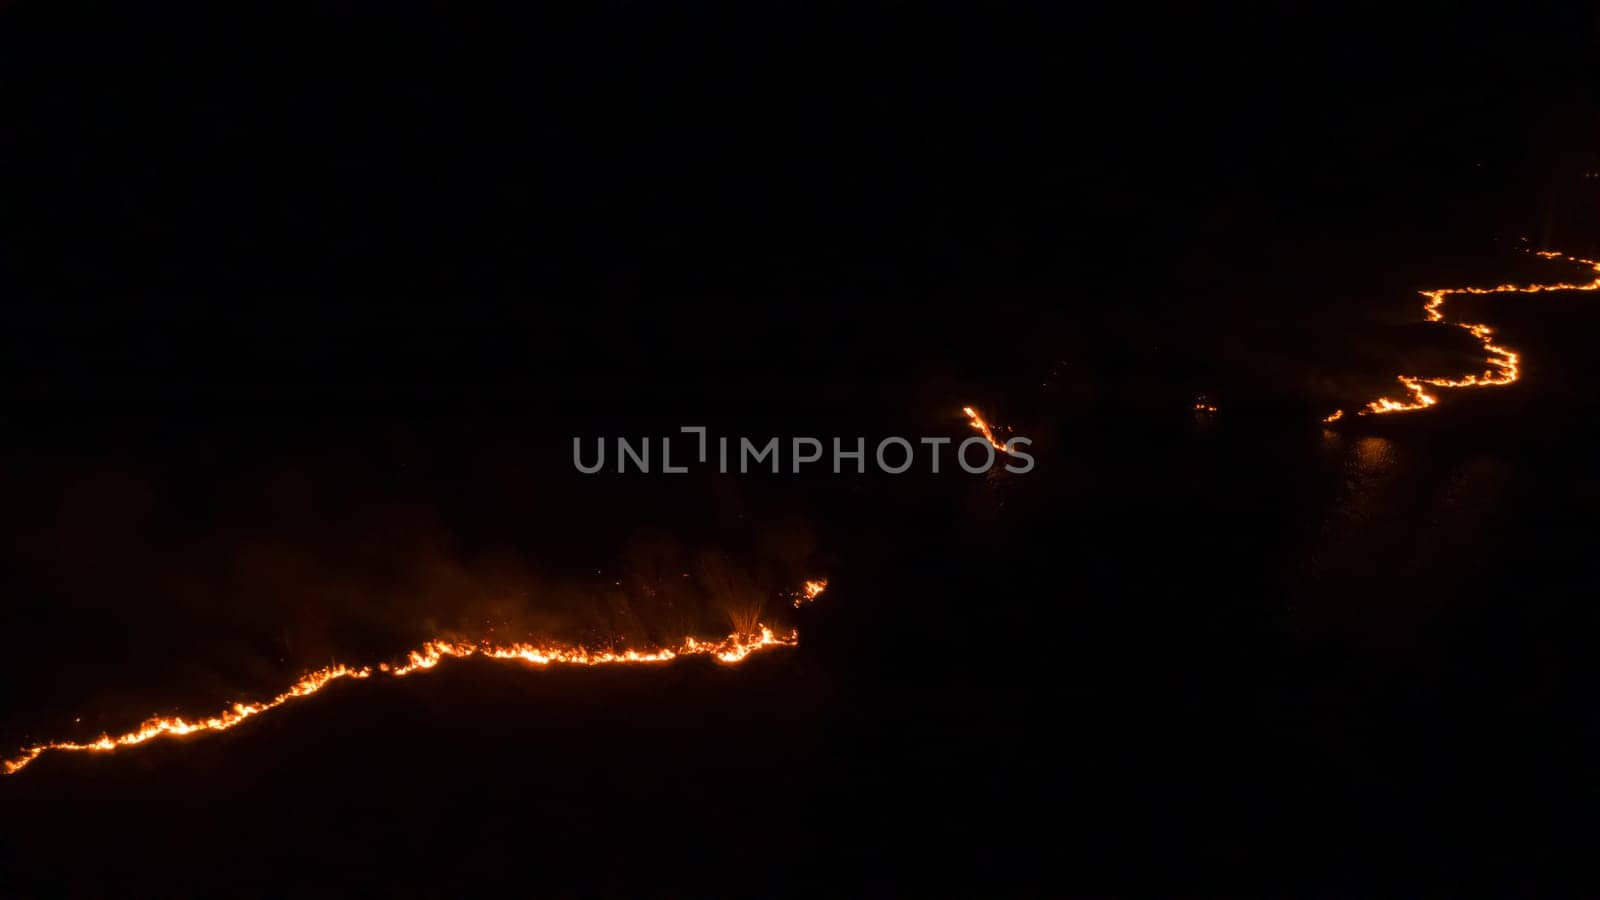 Night fire in the forest with fire and smoke.Epic aerial photo of a smoking wild flame.A blazing,glowing fire at night.Forest fires.Dry grass is burning. climate change,ecology.Line fire in the dark.